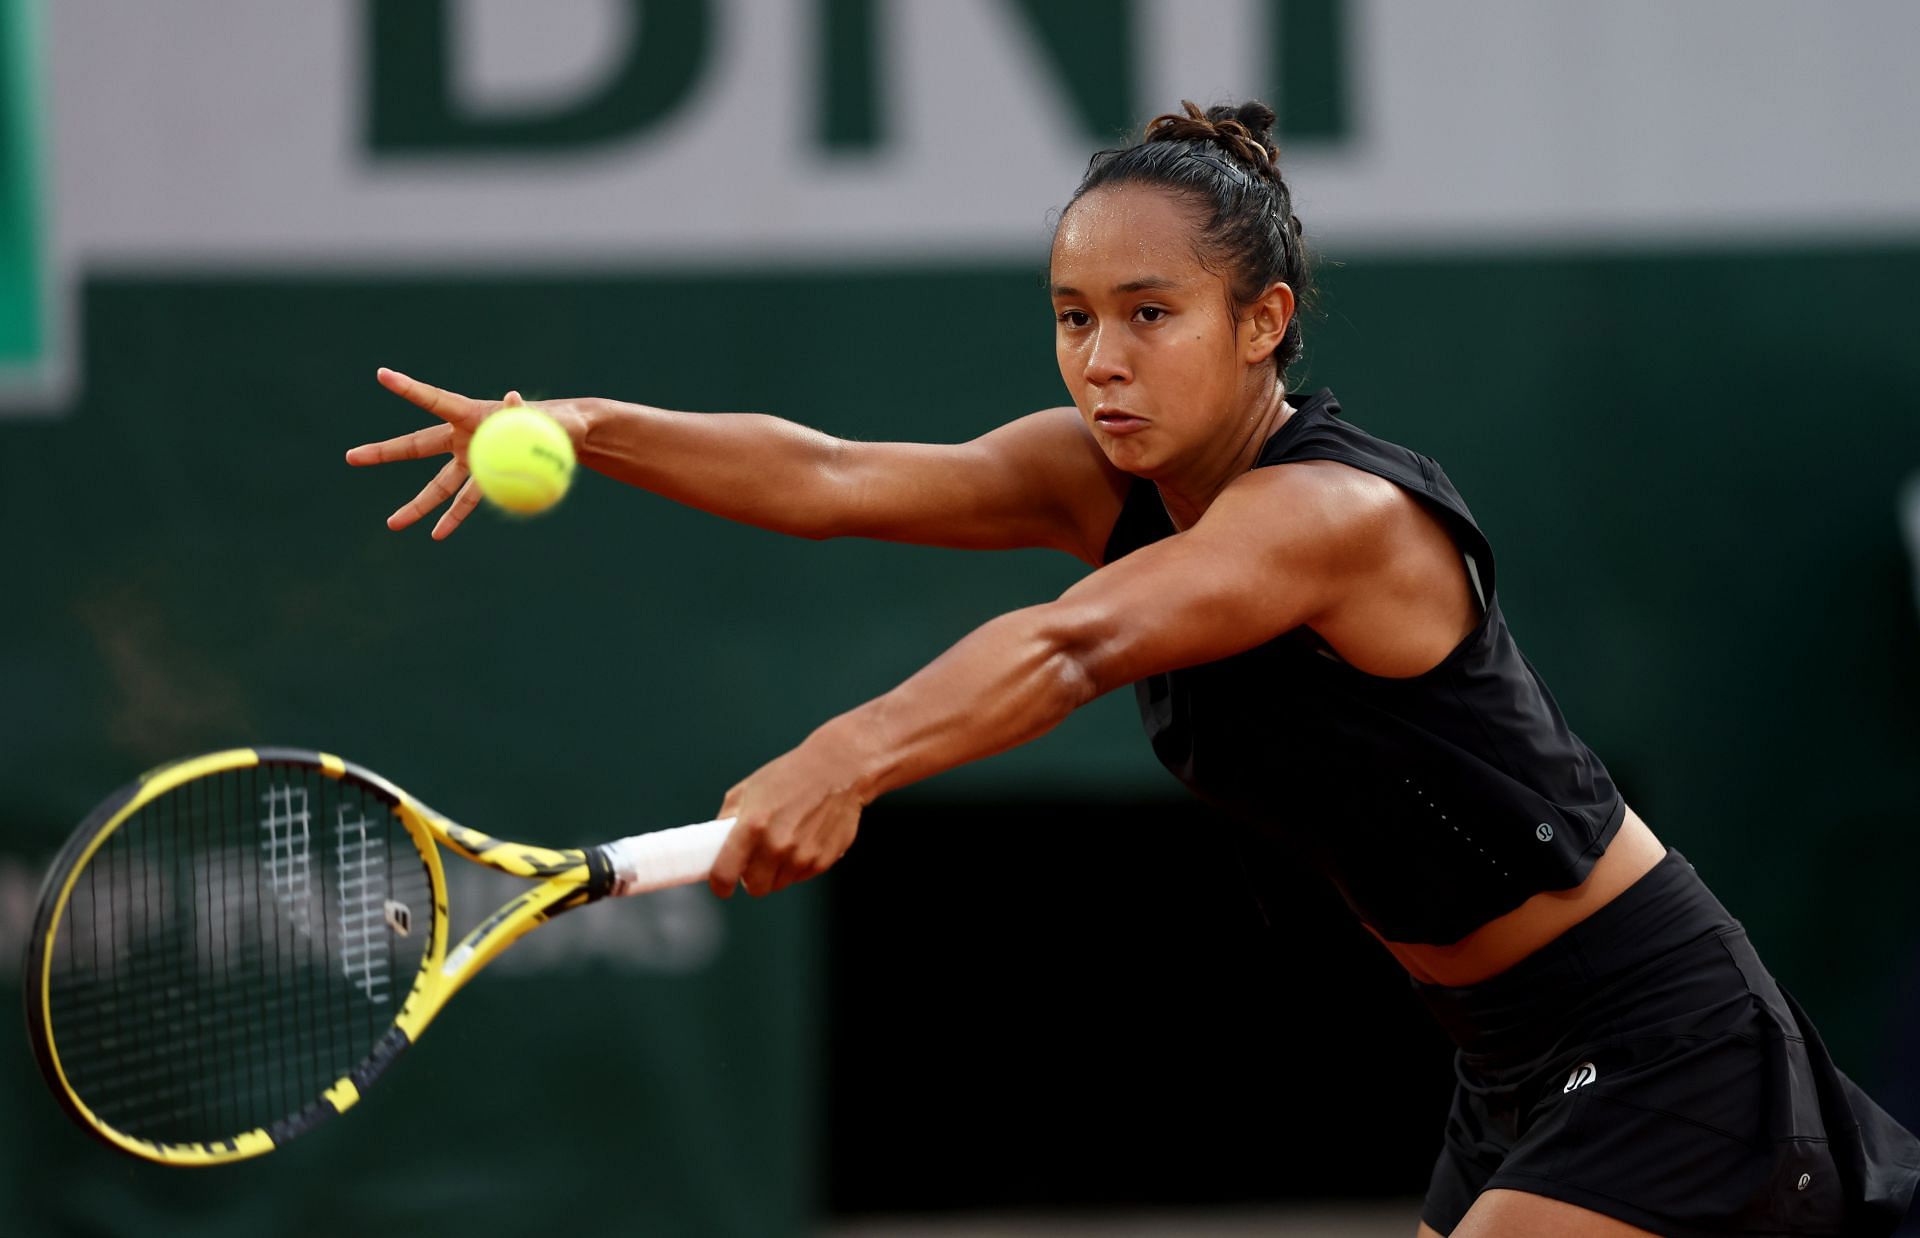 Leylah Fernandez in action at the 2022 French Open